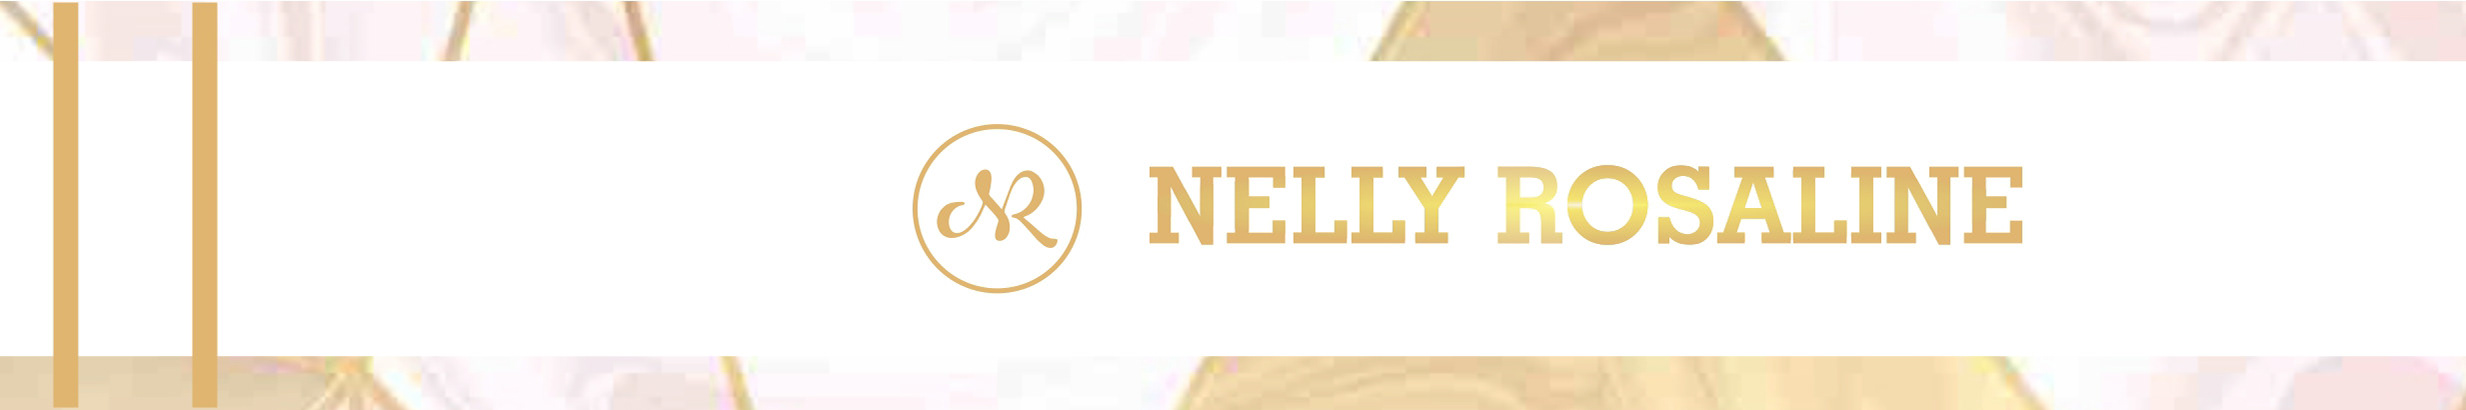 Nelly Rosaline's profile banner